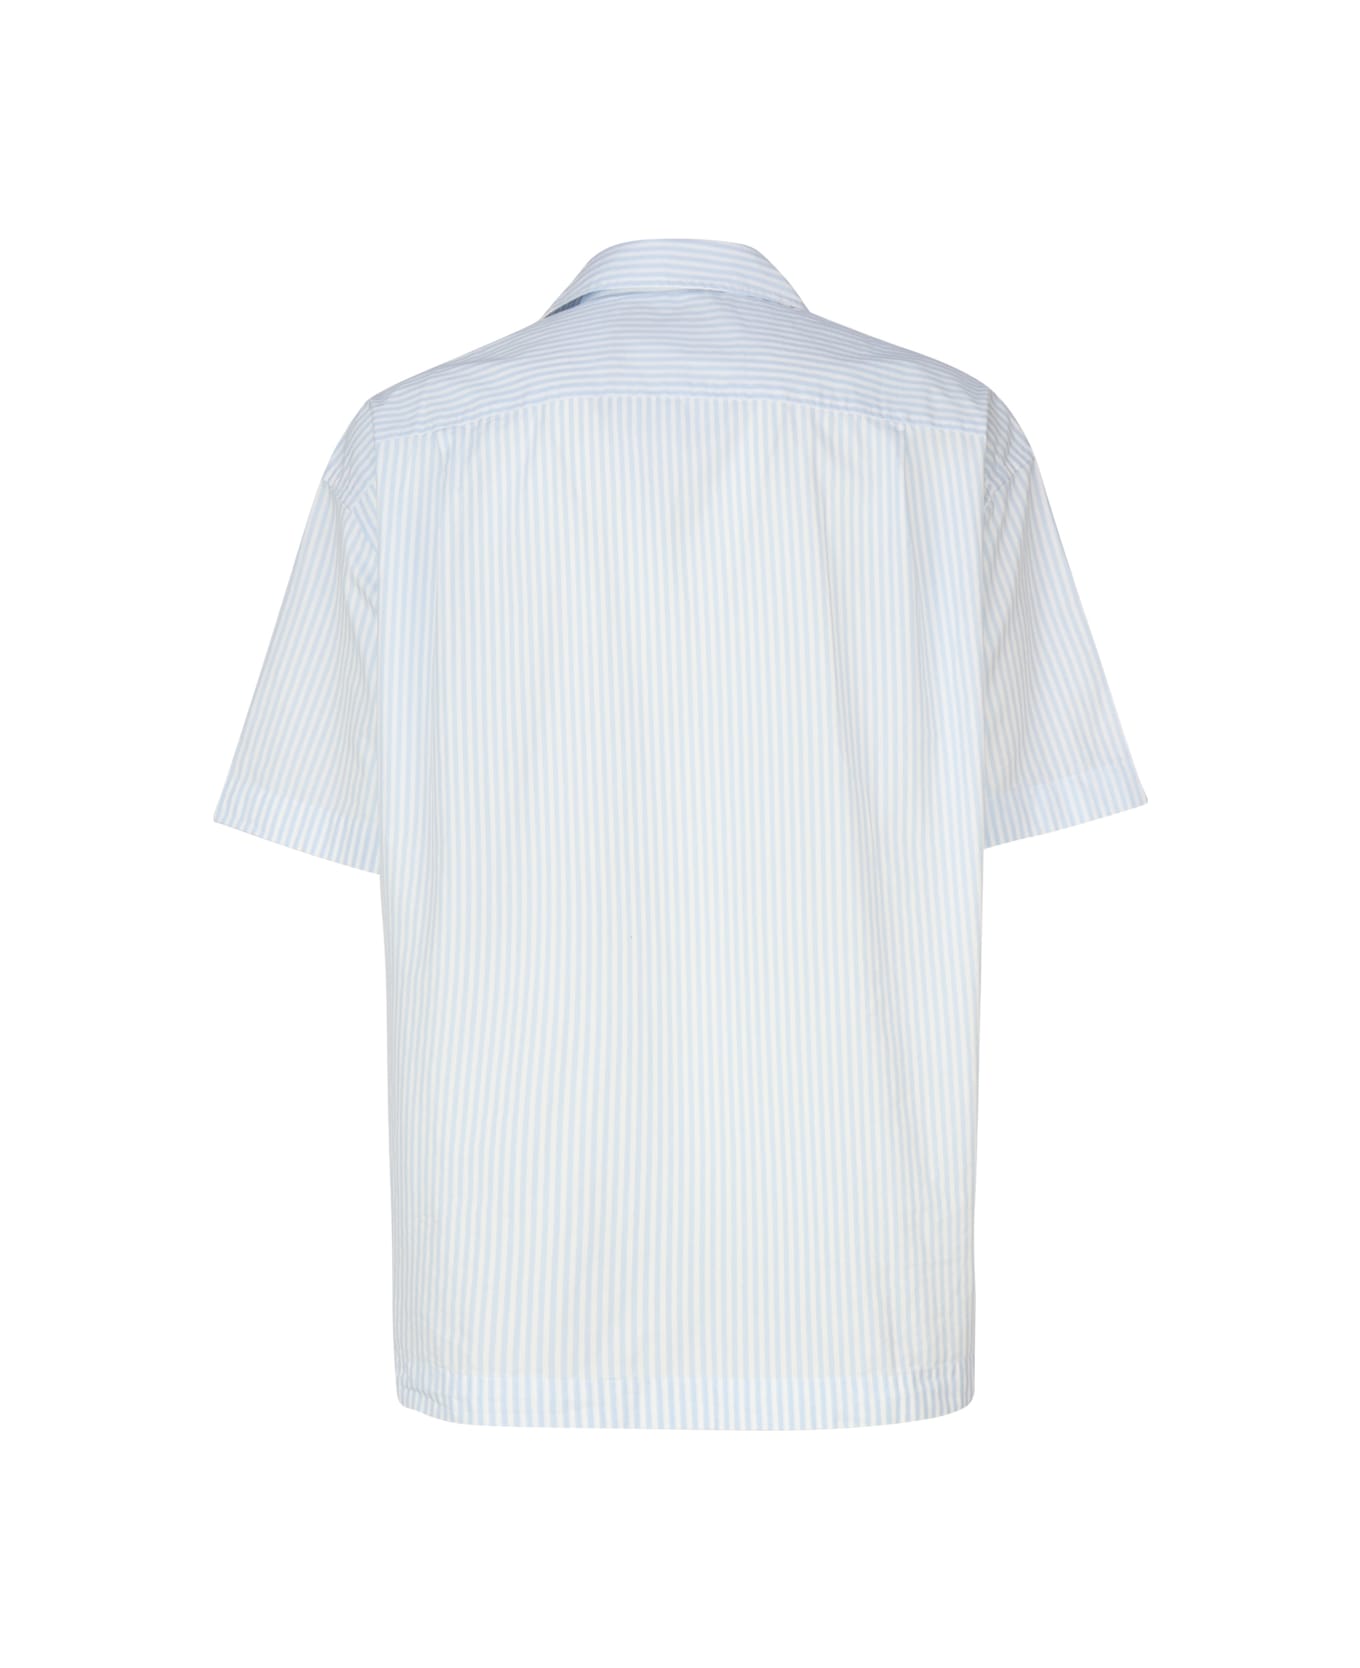 J.W. Anderson Shirt With Print - Light blue